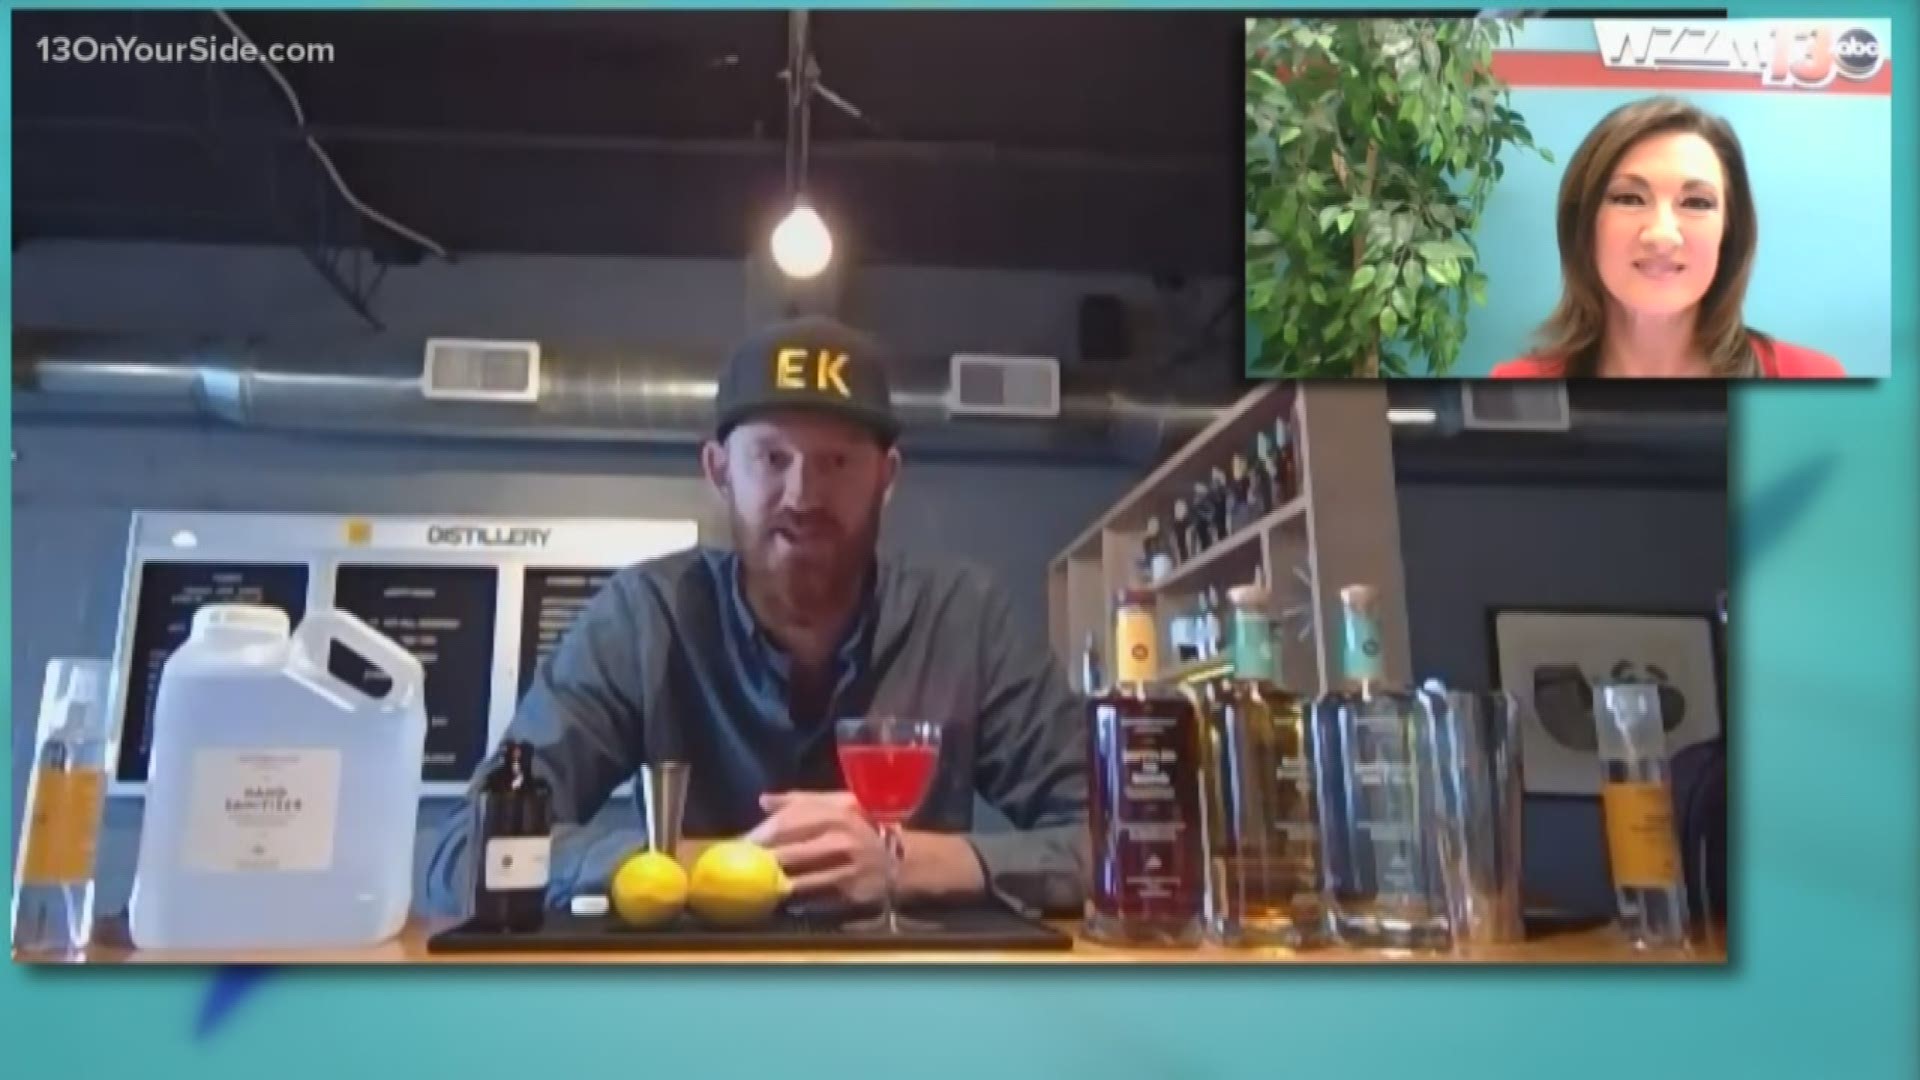 Grand Rapids' Eastern Kille Distillery providing cocktail kits you can pick up curbside